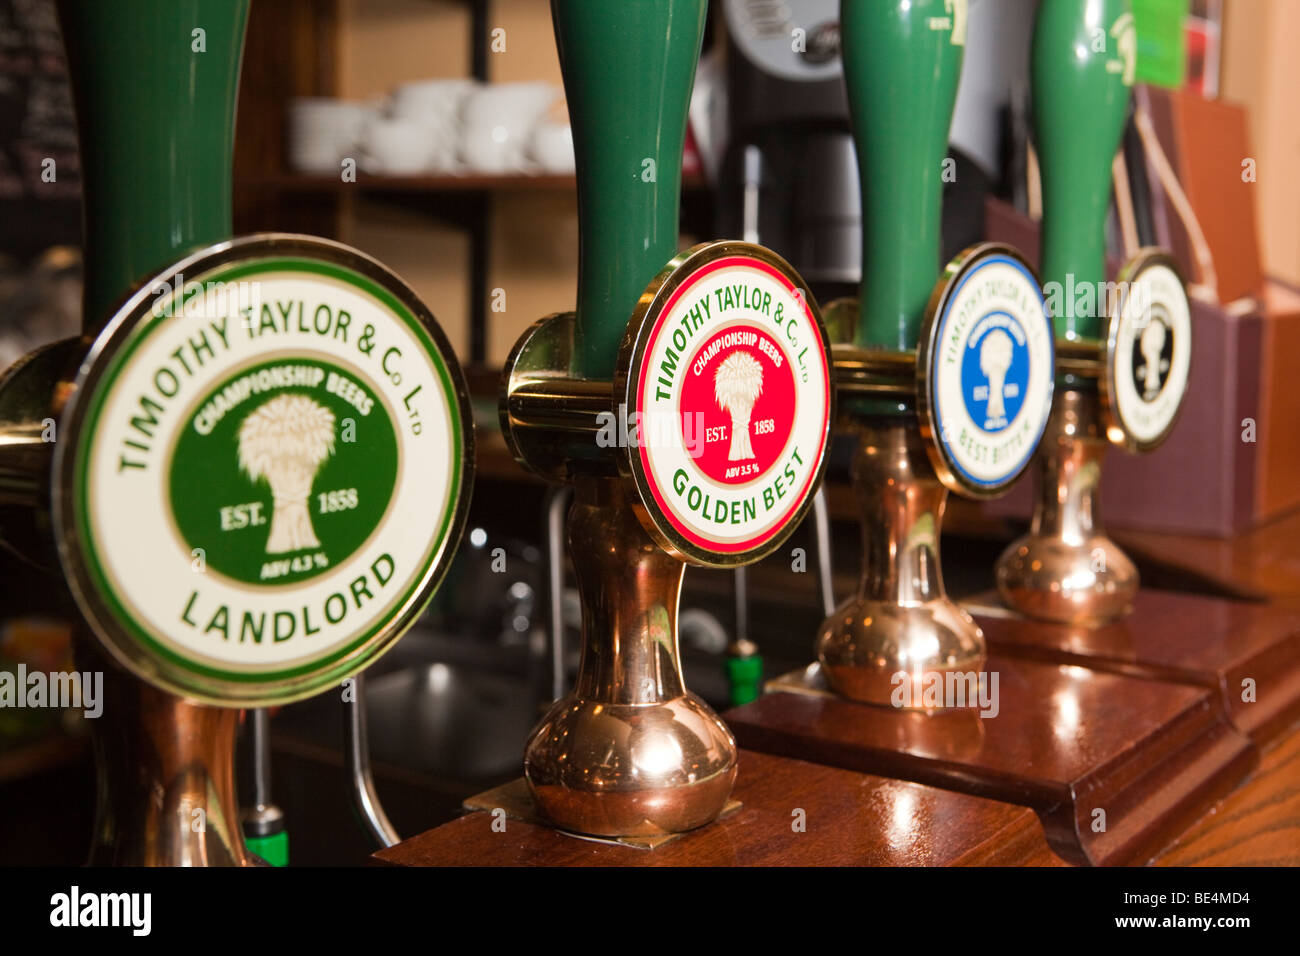 UK, England, Yorkshire, Haworth, Timothy Taylor’s Keighley Brewery beer hand pumps on bar Stock Photo